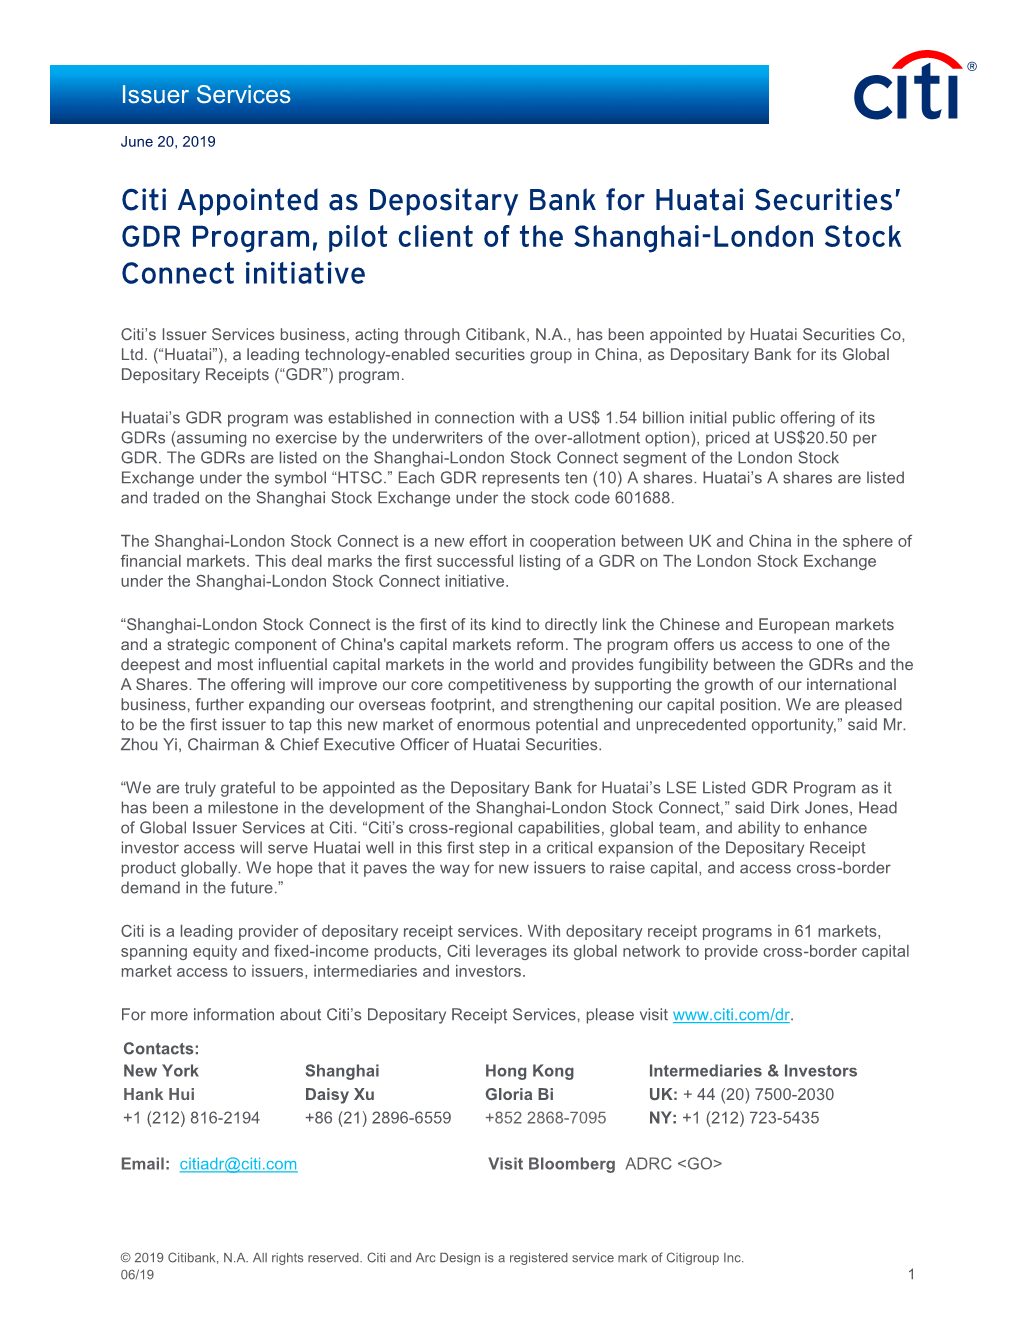 Citi Appointed As Depositary Bank for Huatai Securities' GDR Program